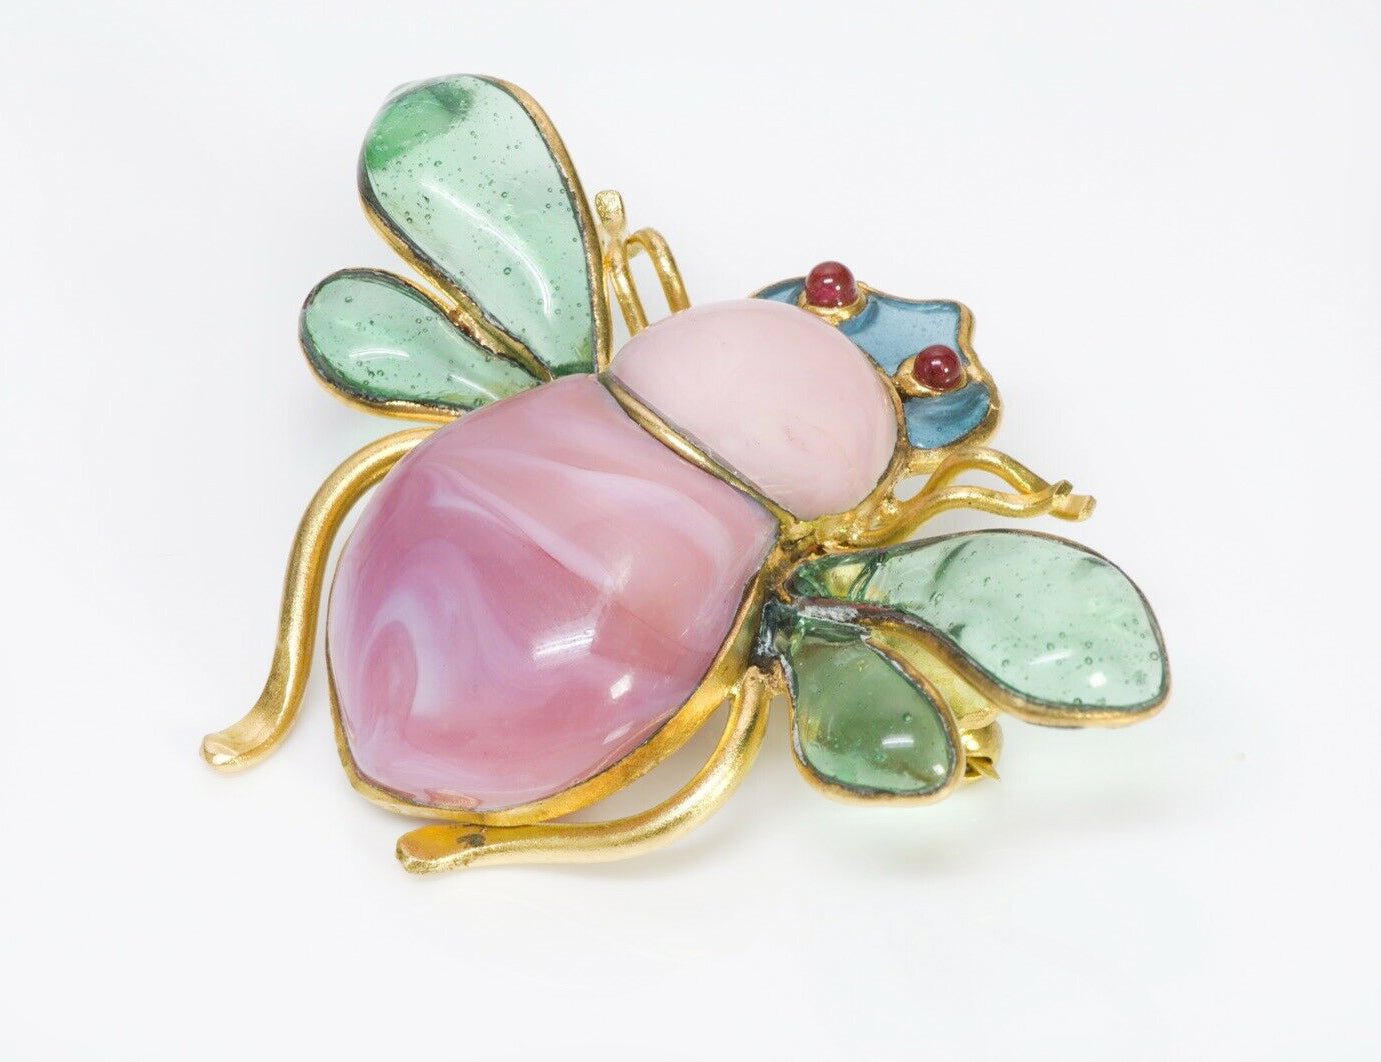 CHANEL 1993 Maison Gripoix Glass Royal Bee Brooch